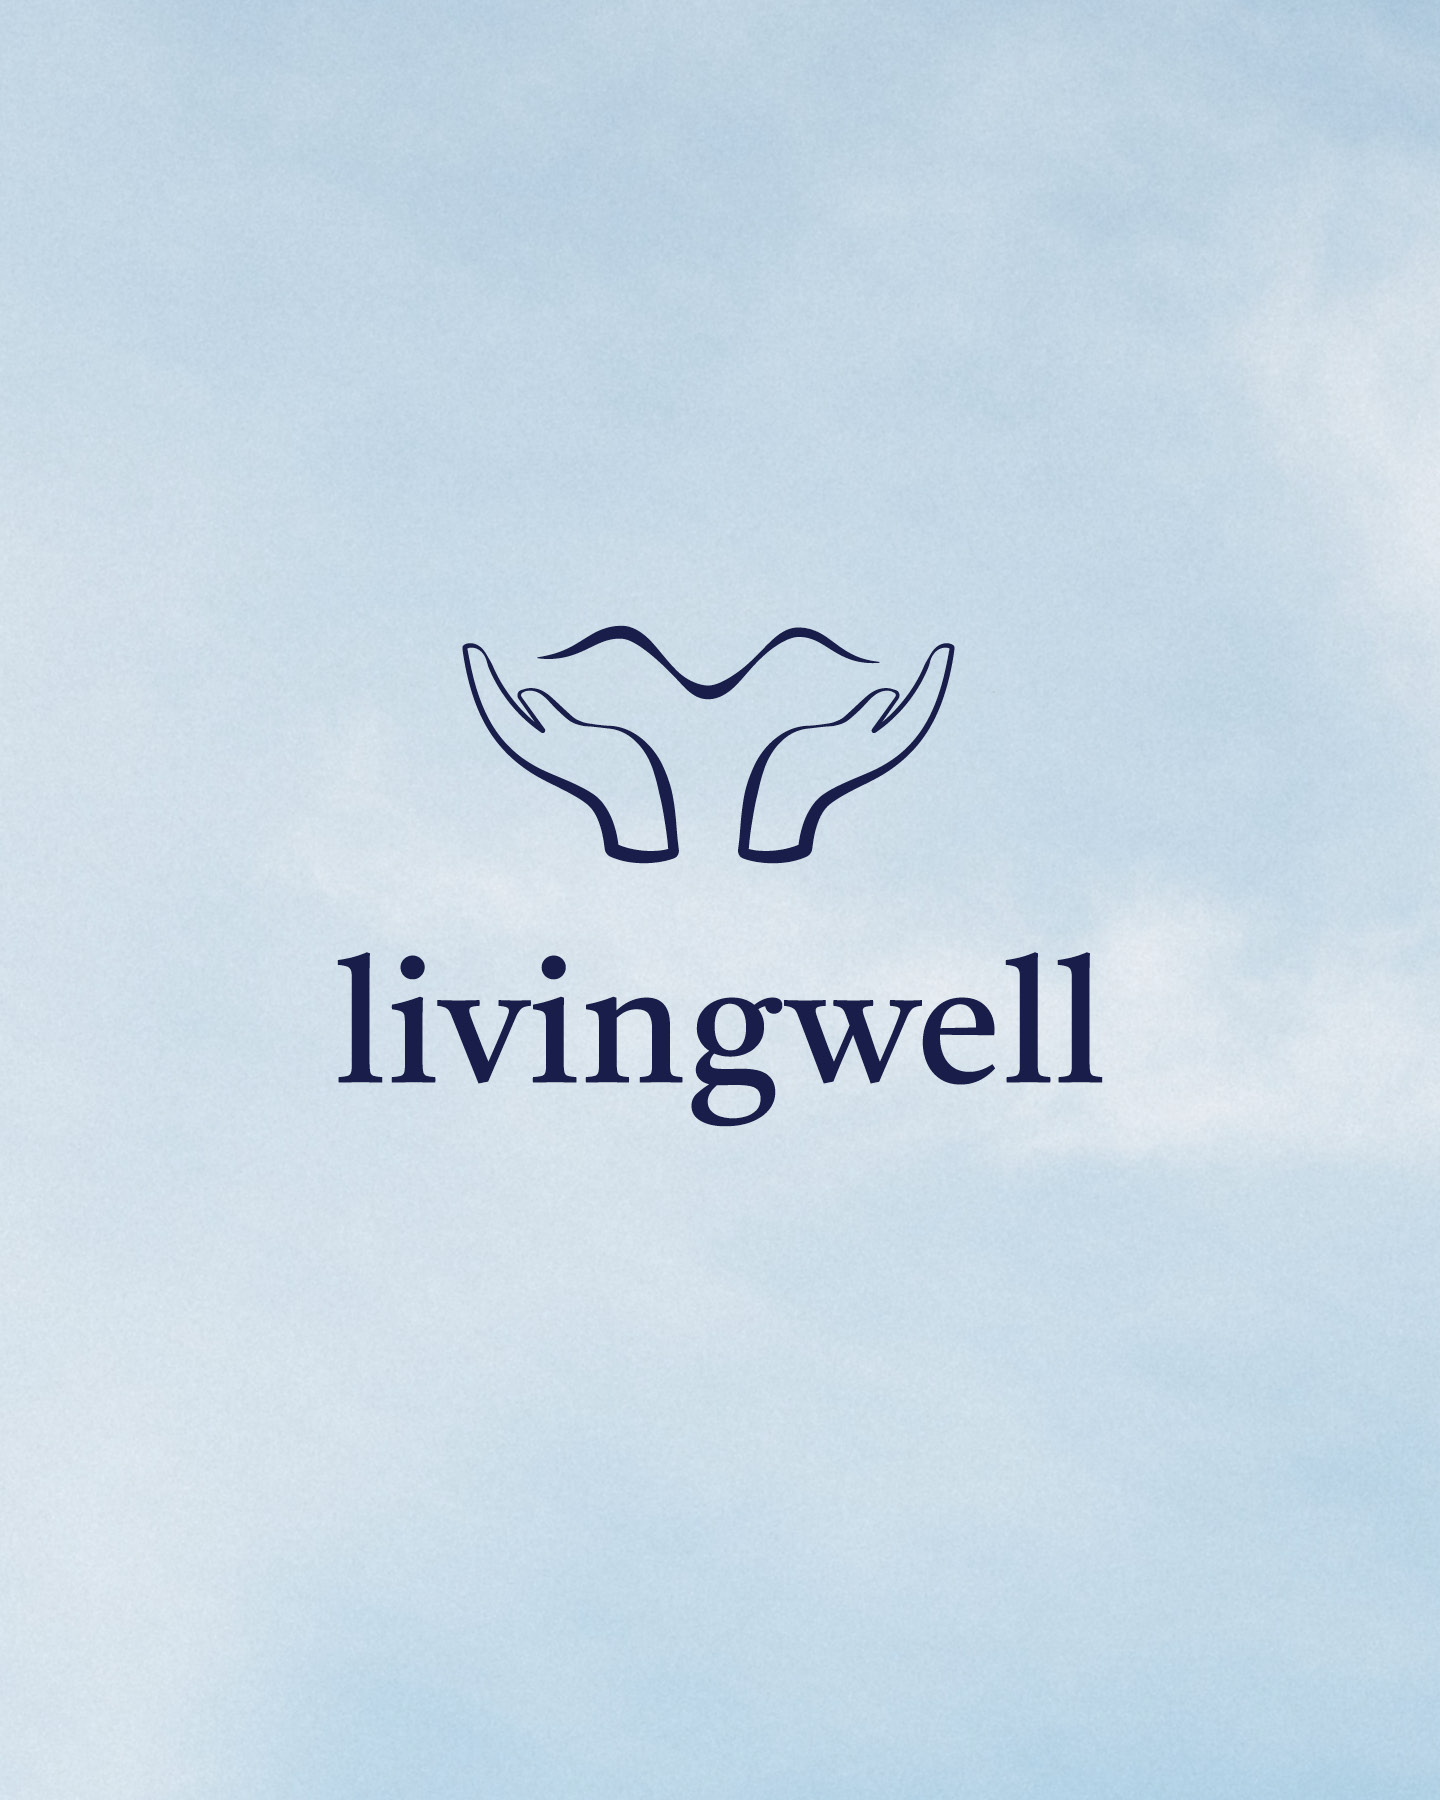 secondary logo of living well - by corliss design